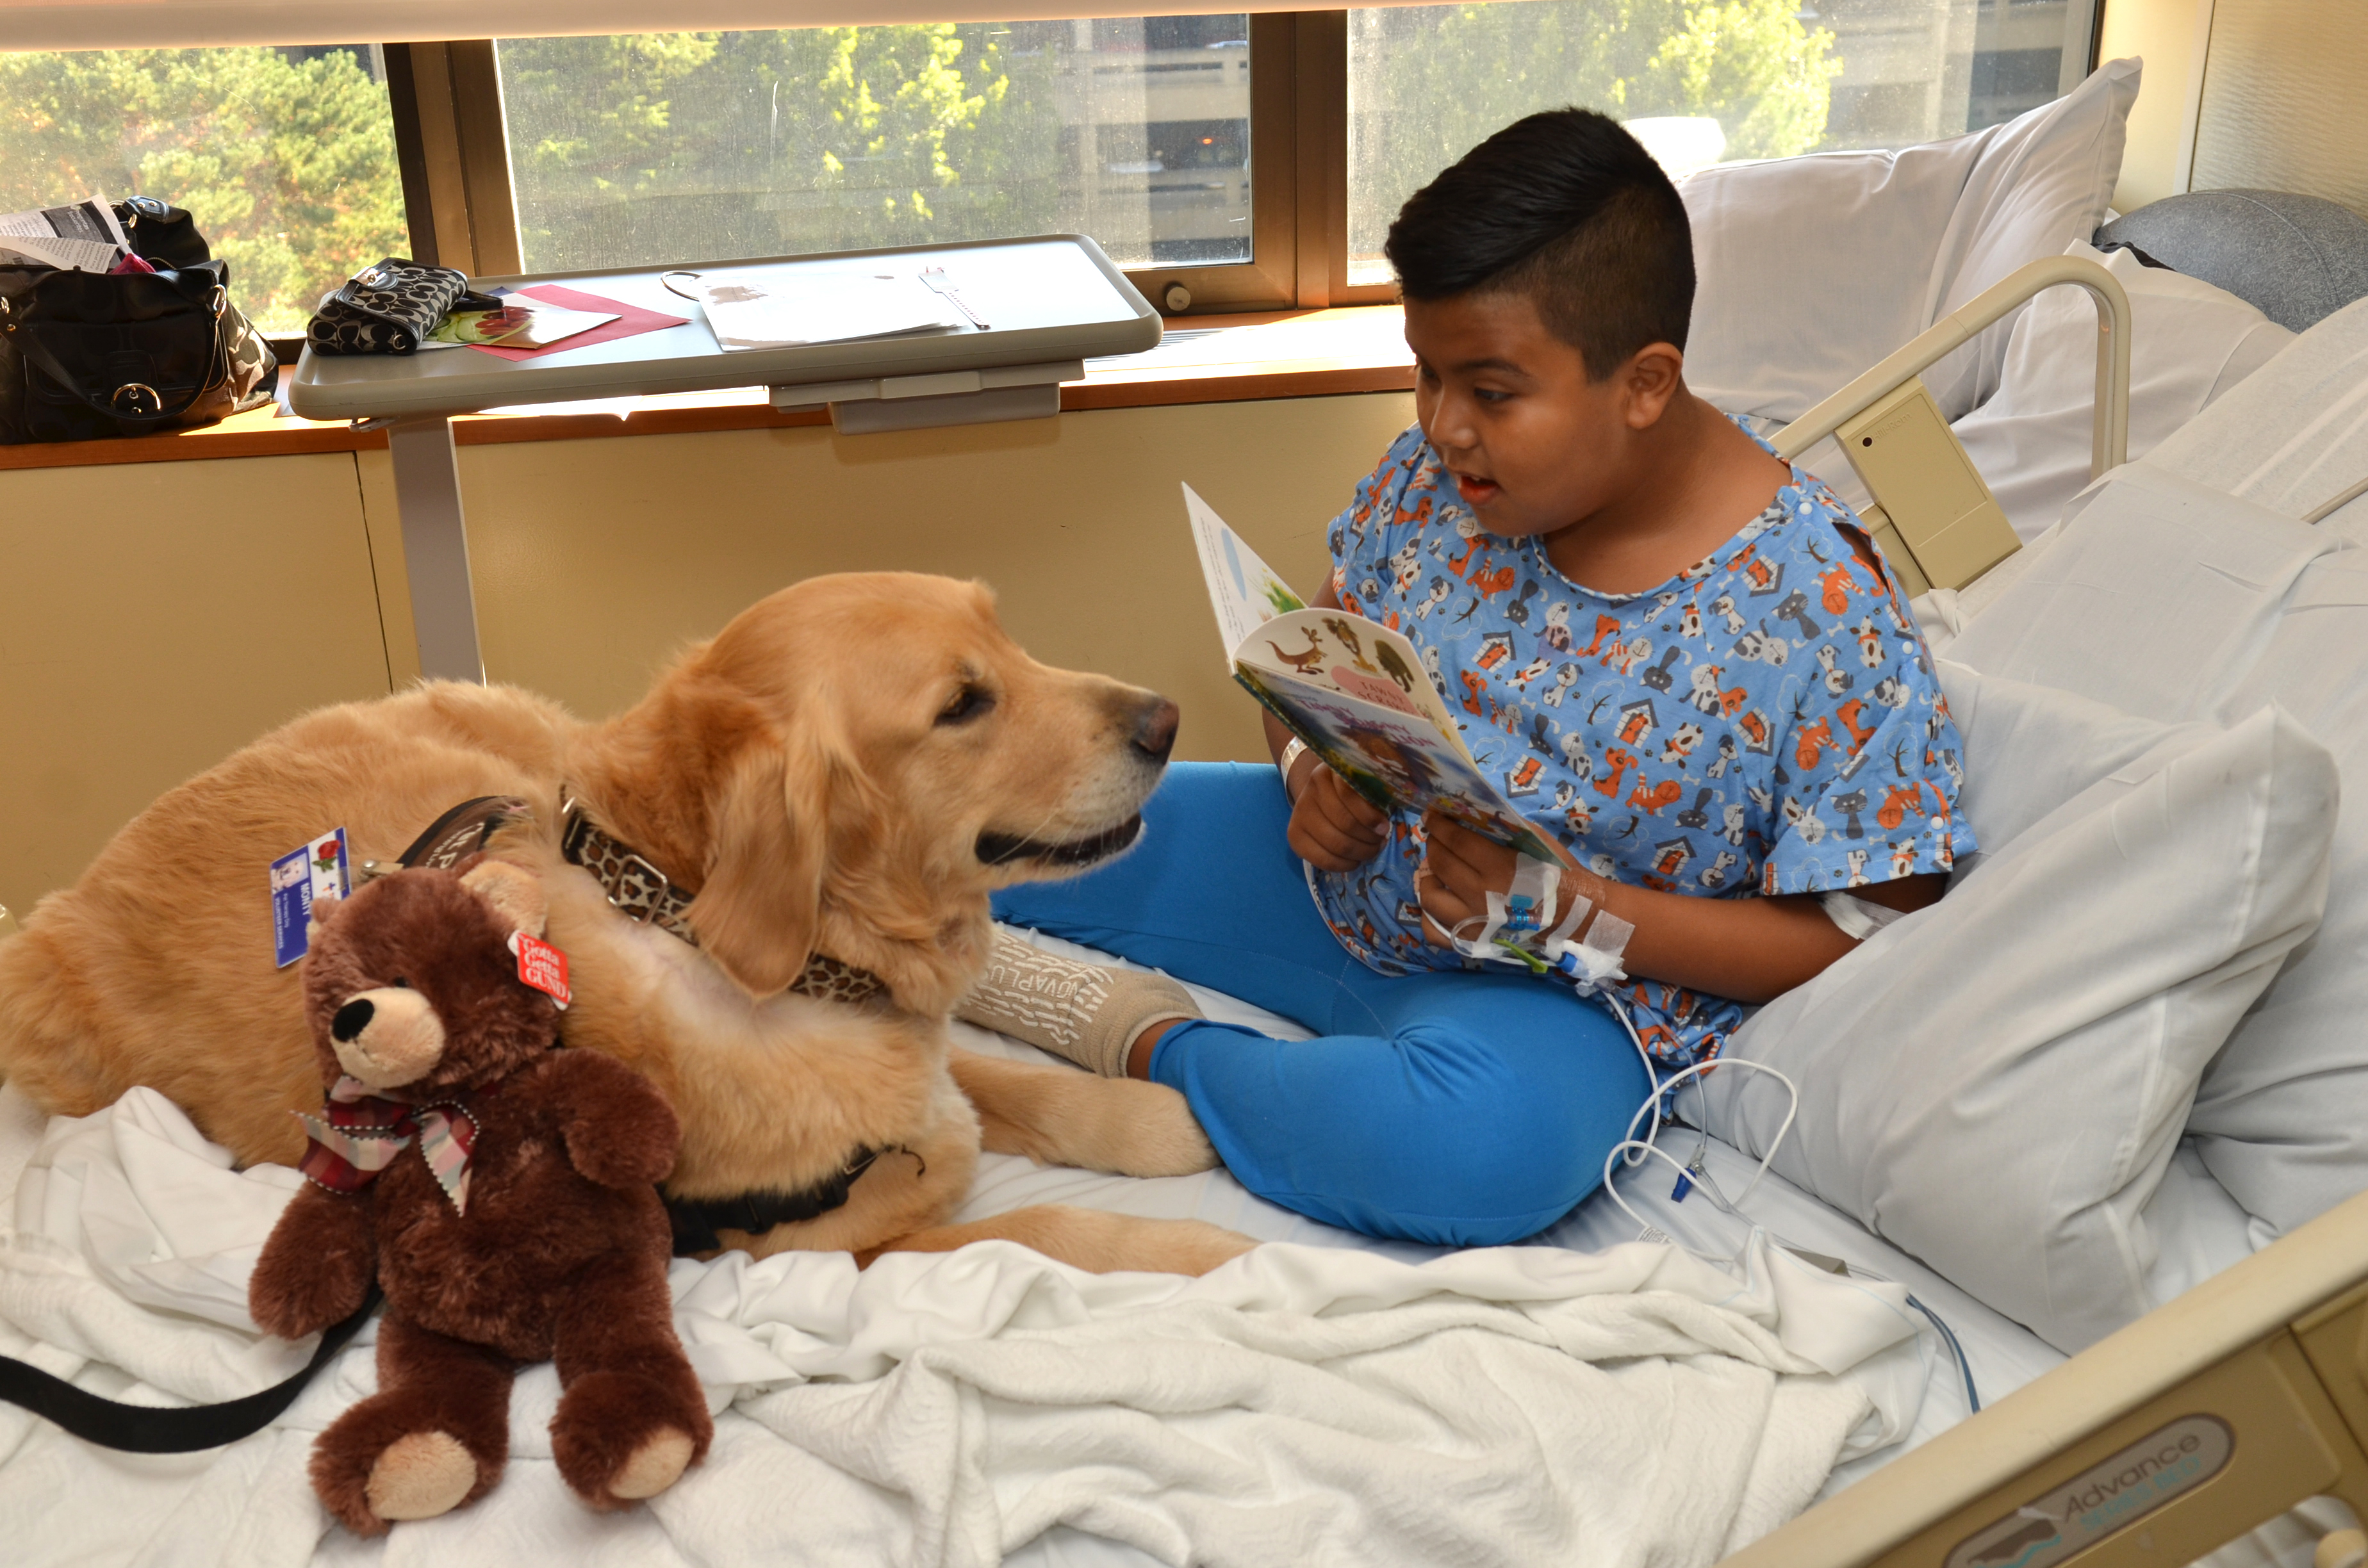 Celebrating Therapy Animals During National Pet Month | HuffPost Impact